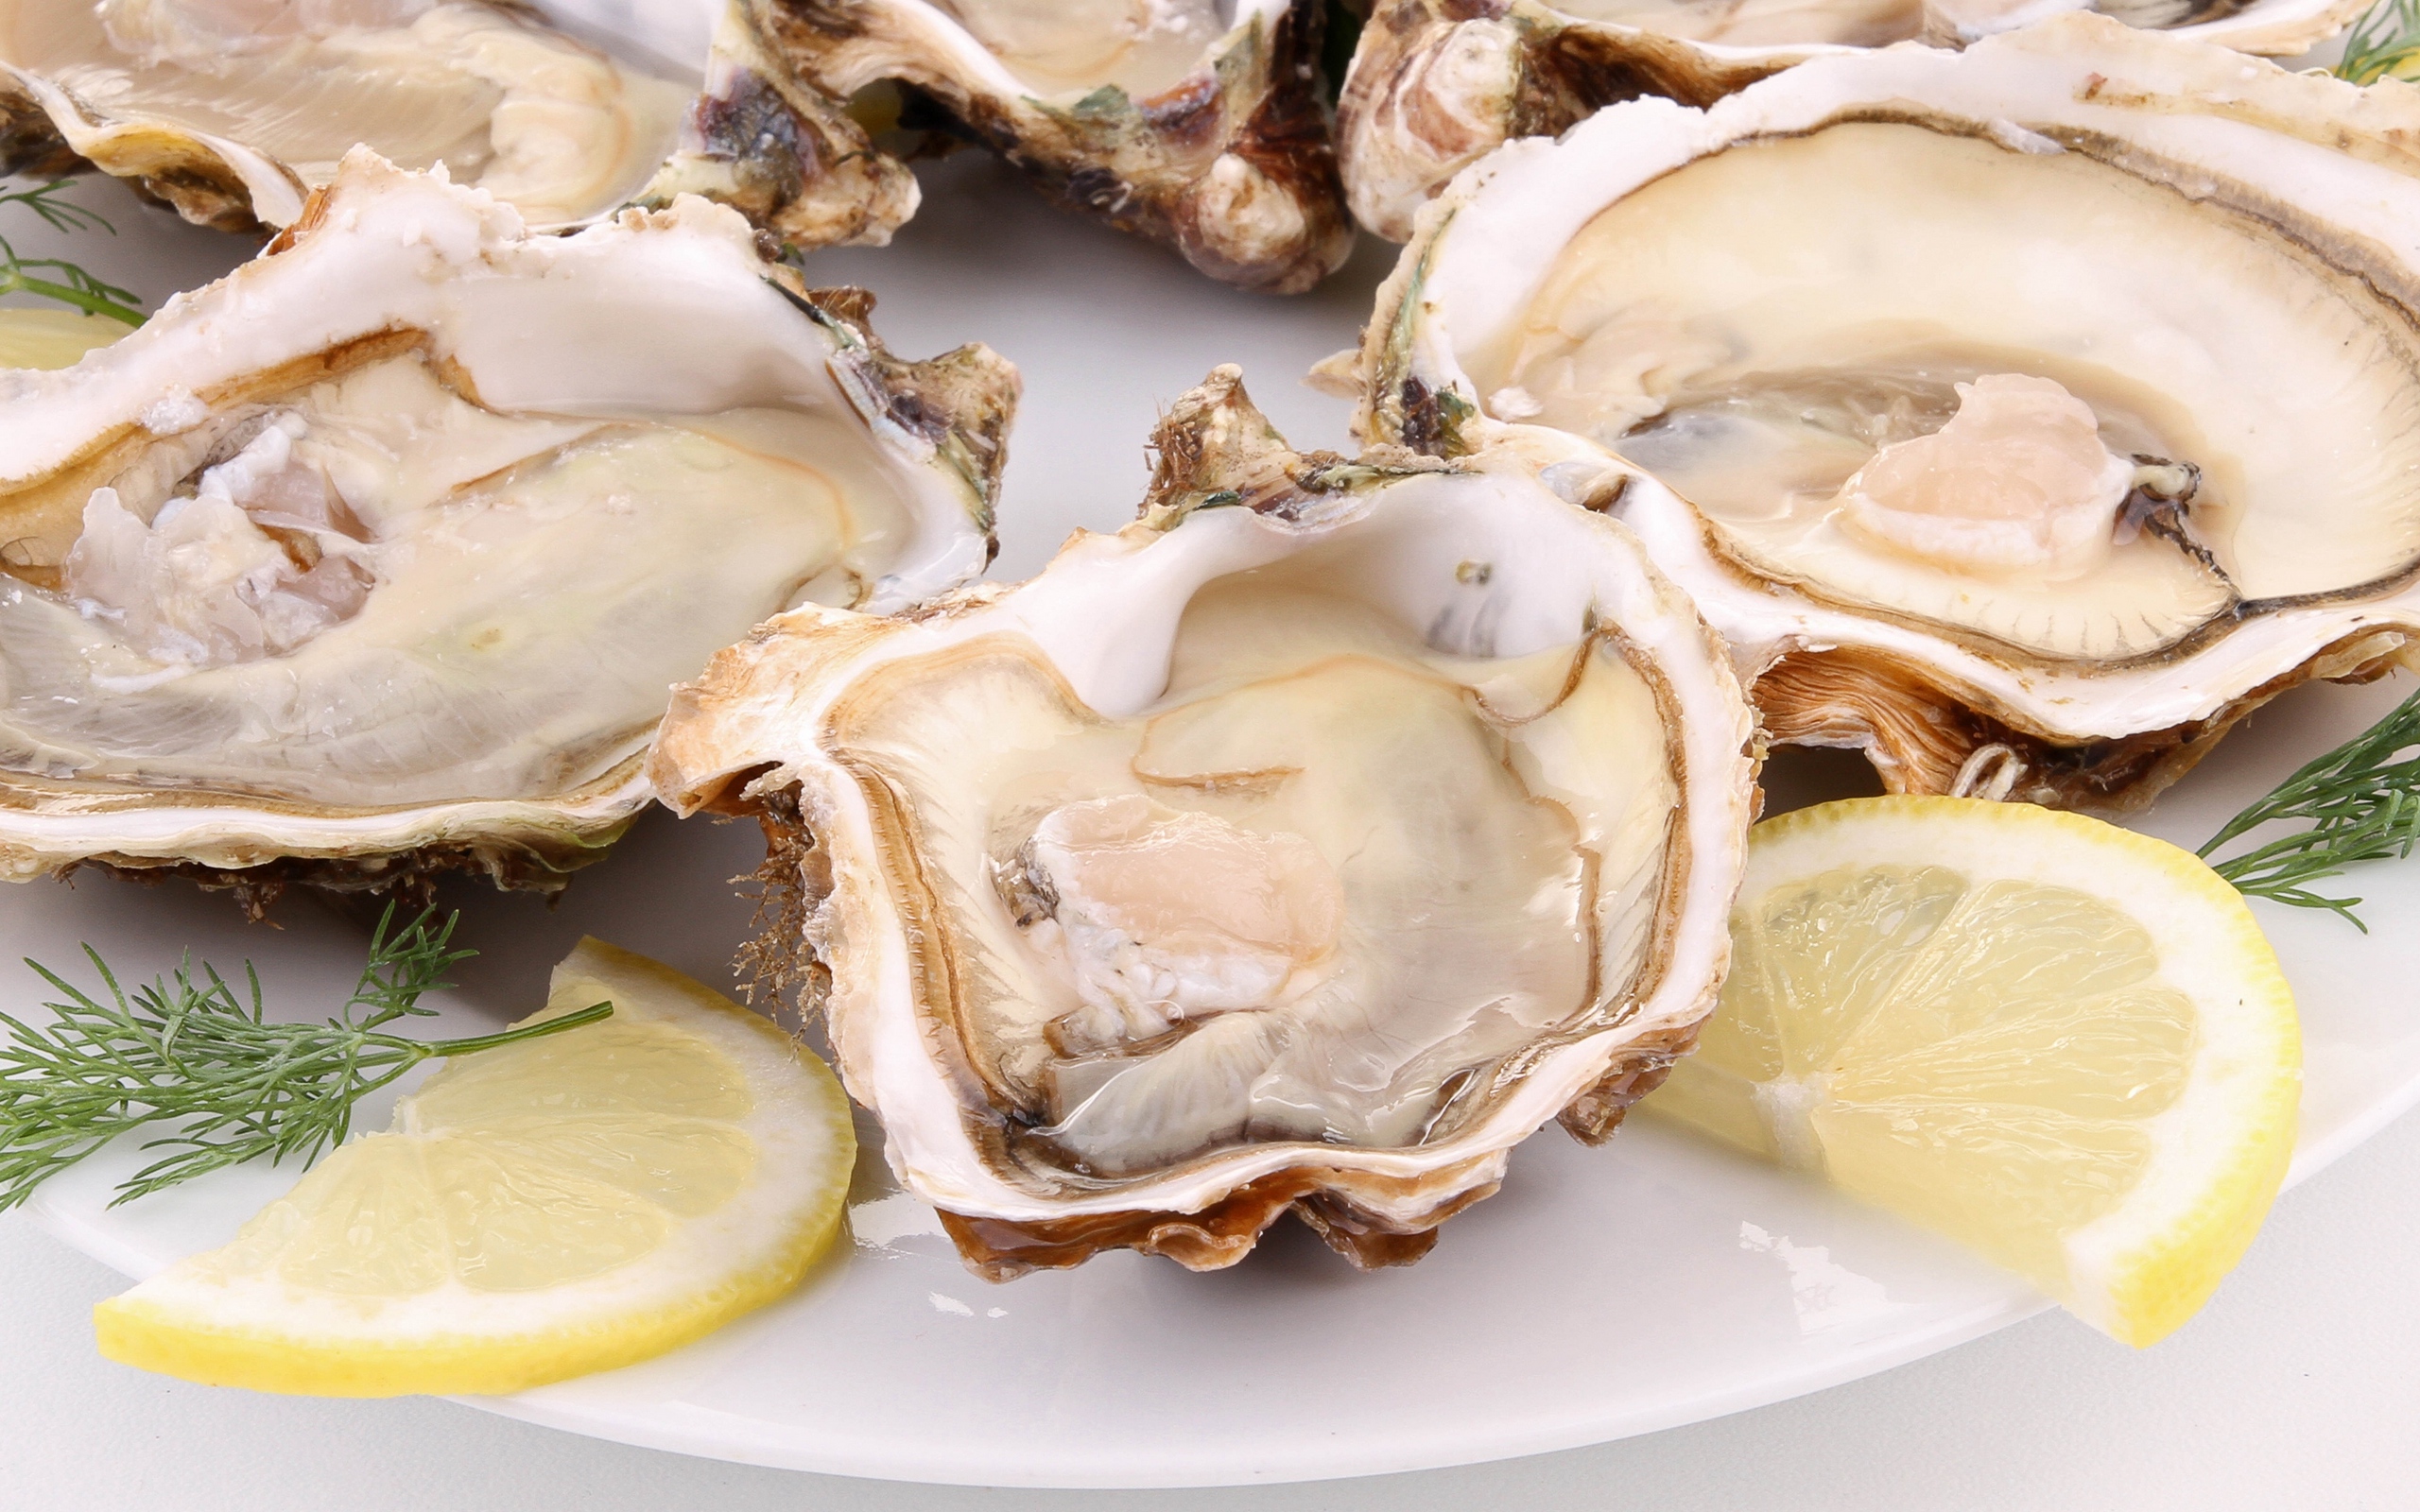 Download wallpaper 2560x1600 oysters, clams, dish, lemon